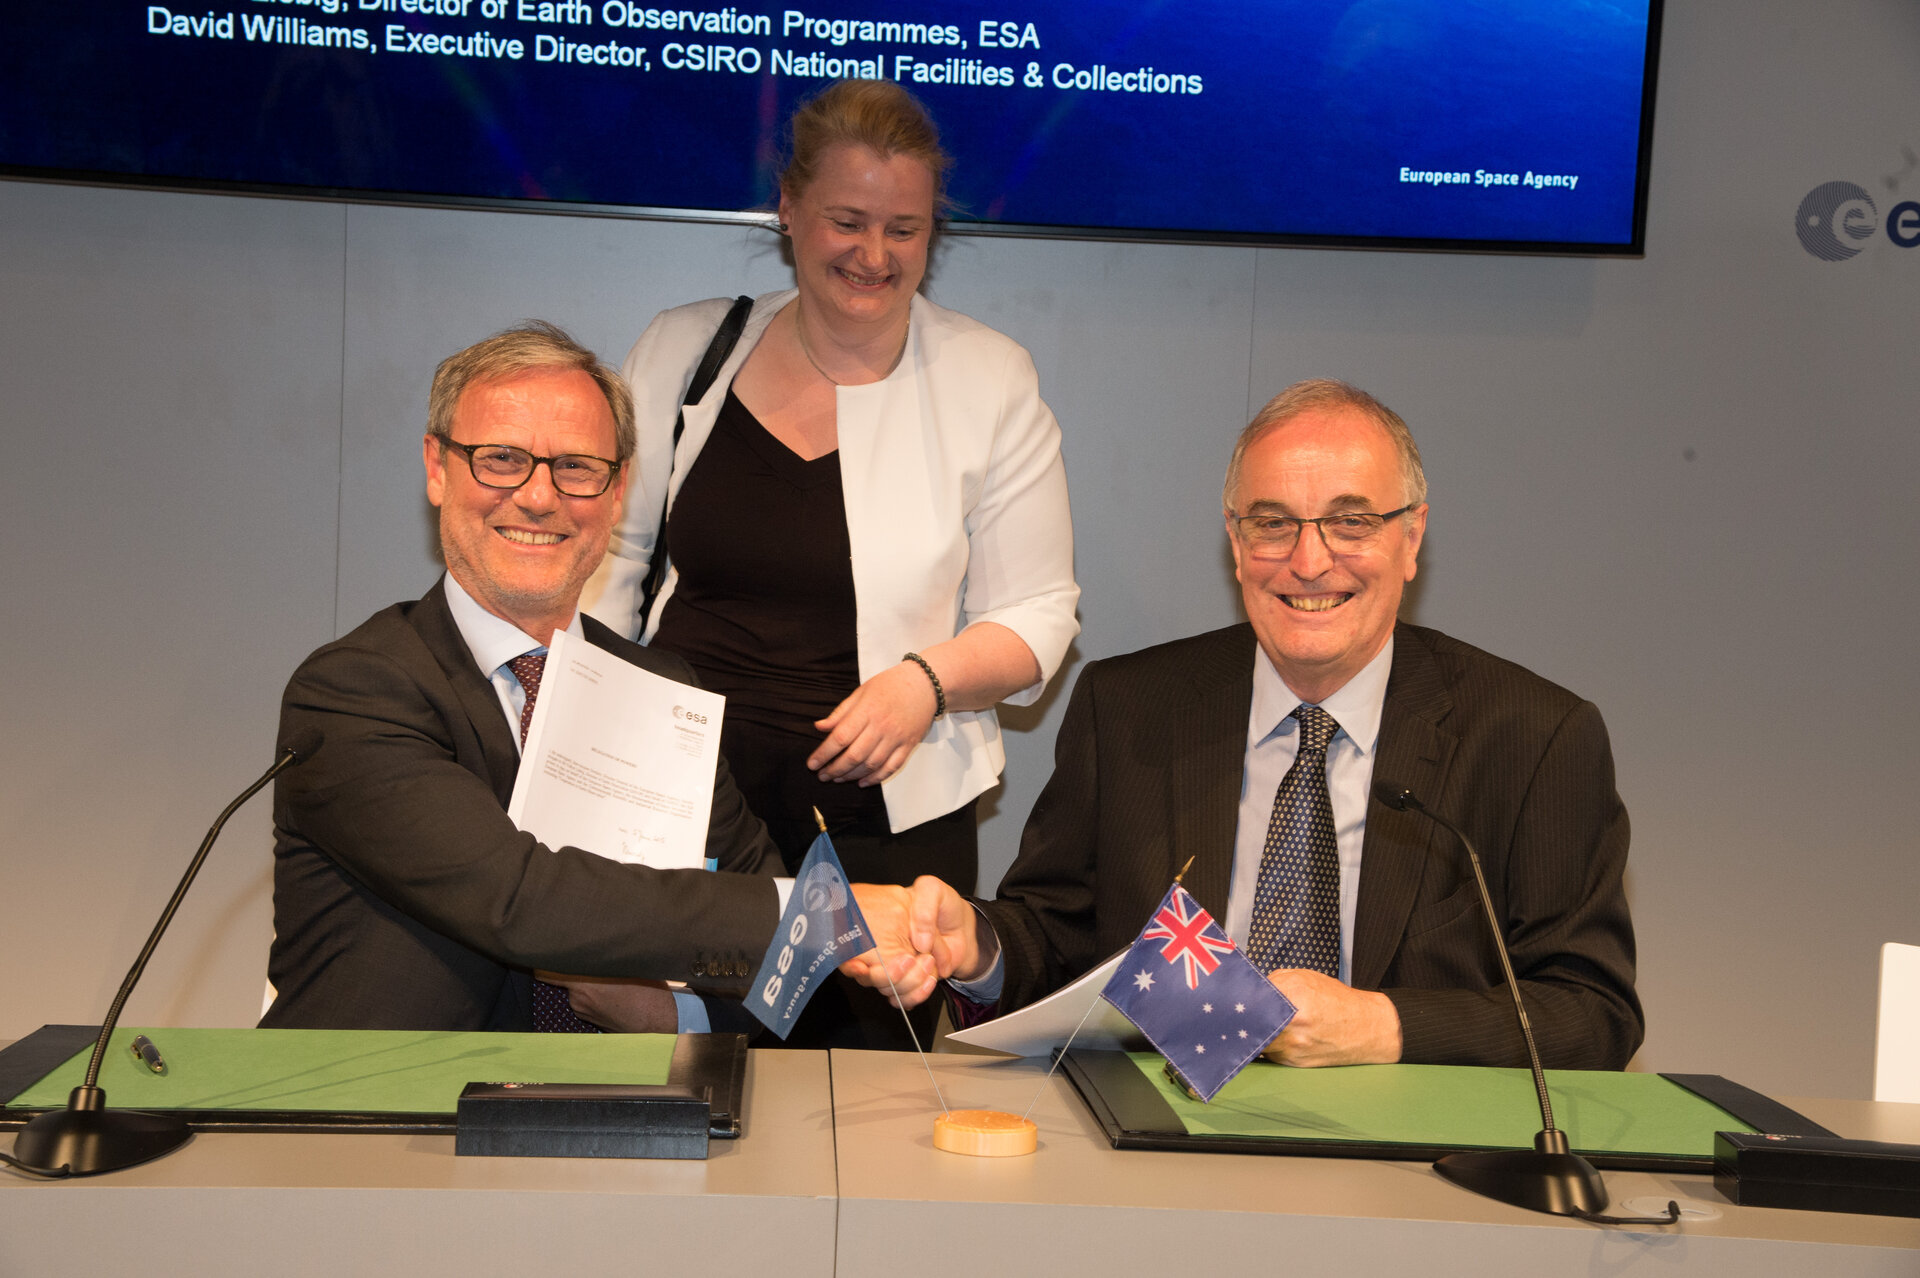 Agreement on the collaboration between Australian and European researchers